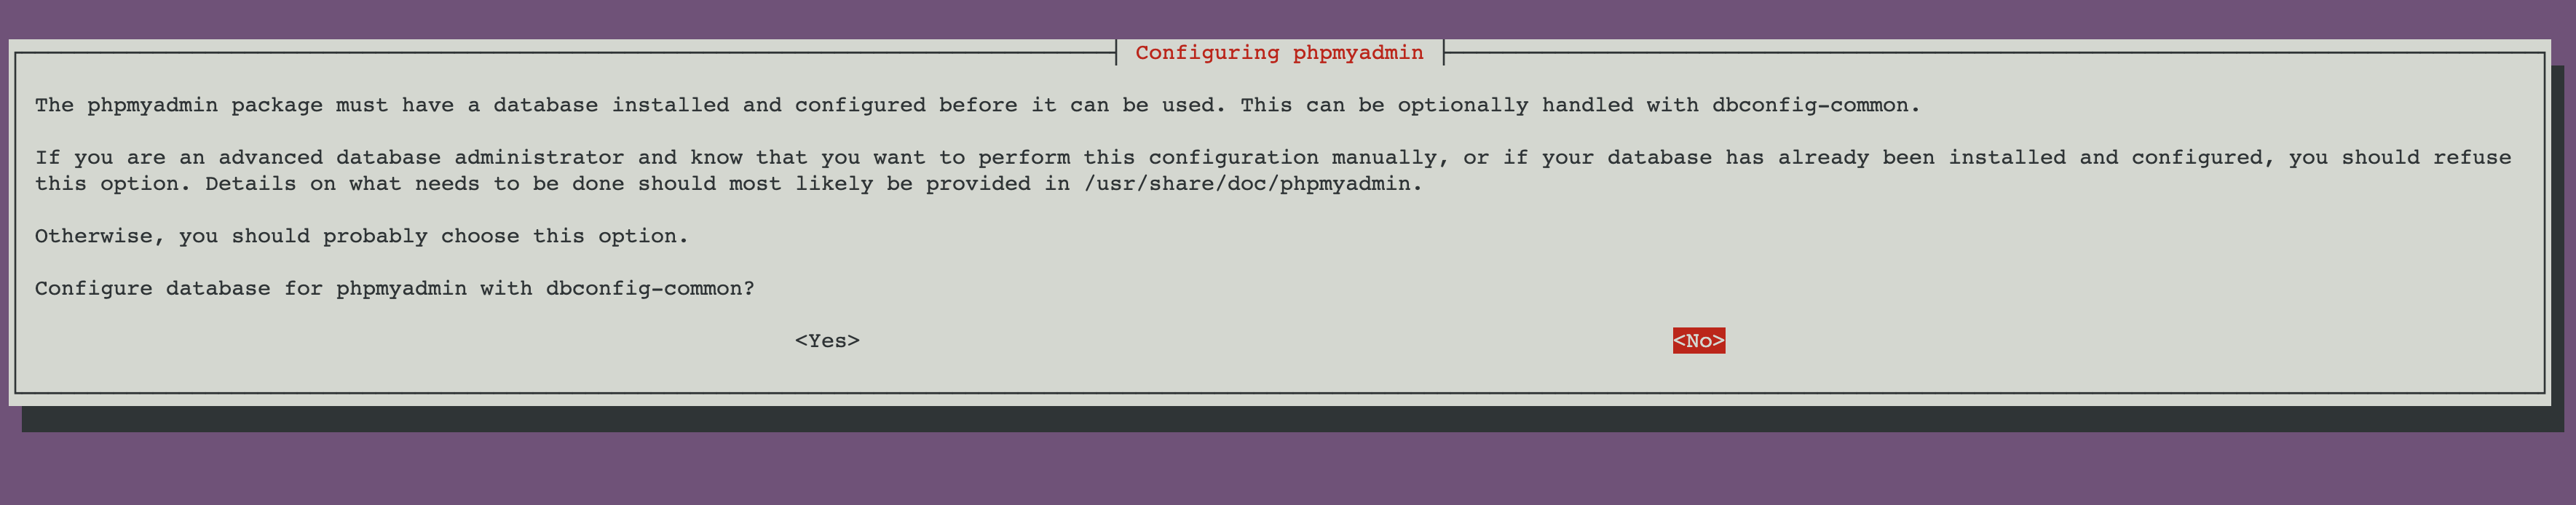 <code>dbconfig-common</code> selection when configuring phpMyAdmin